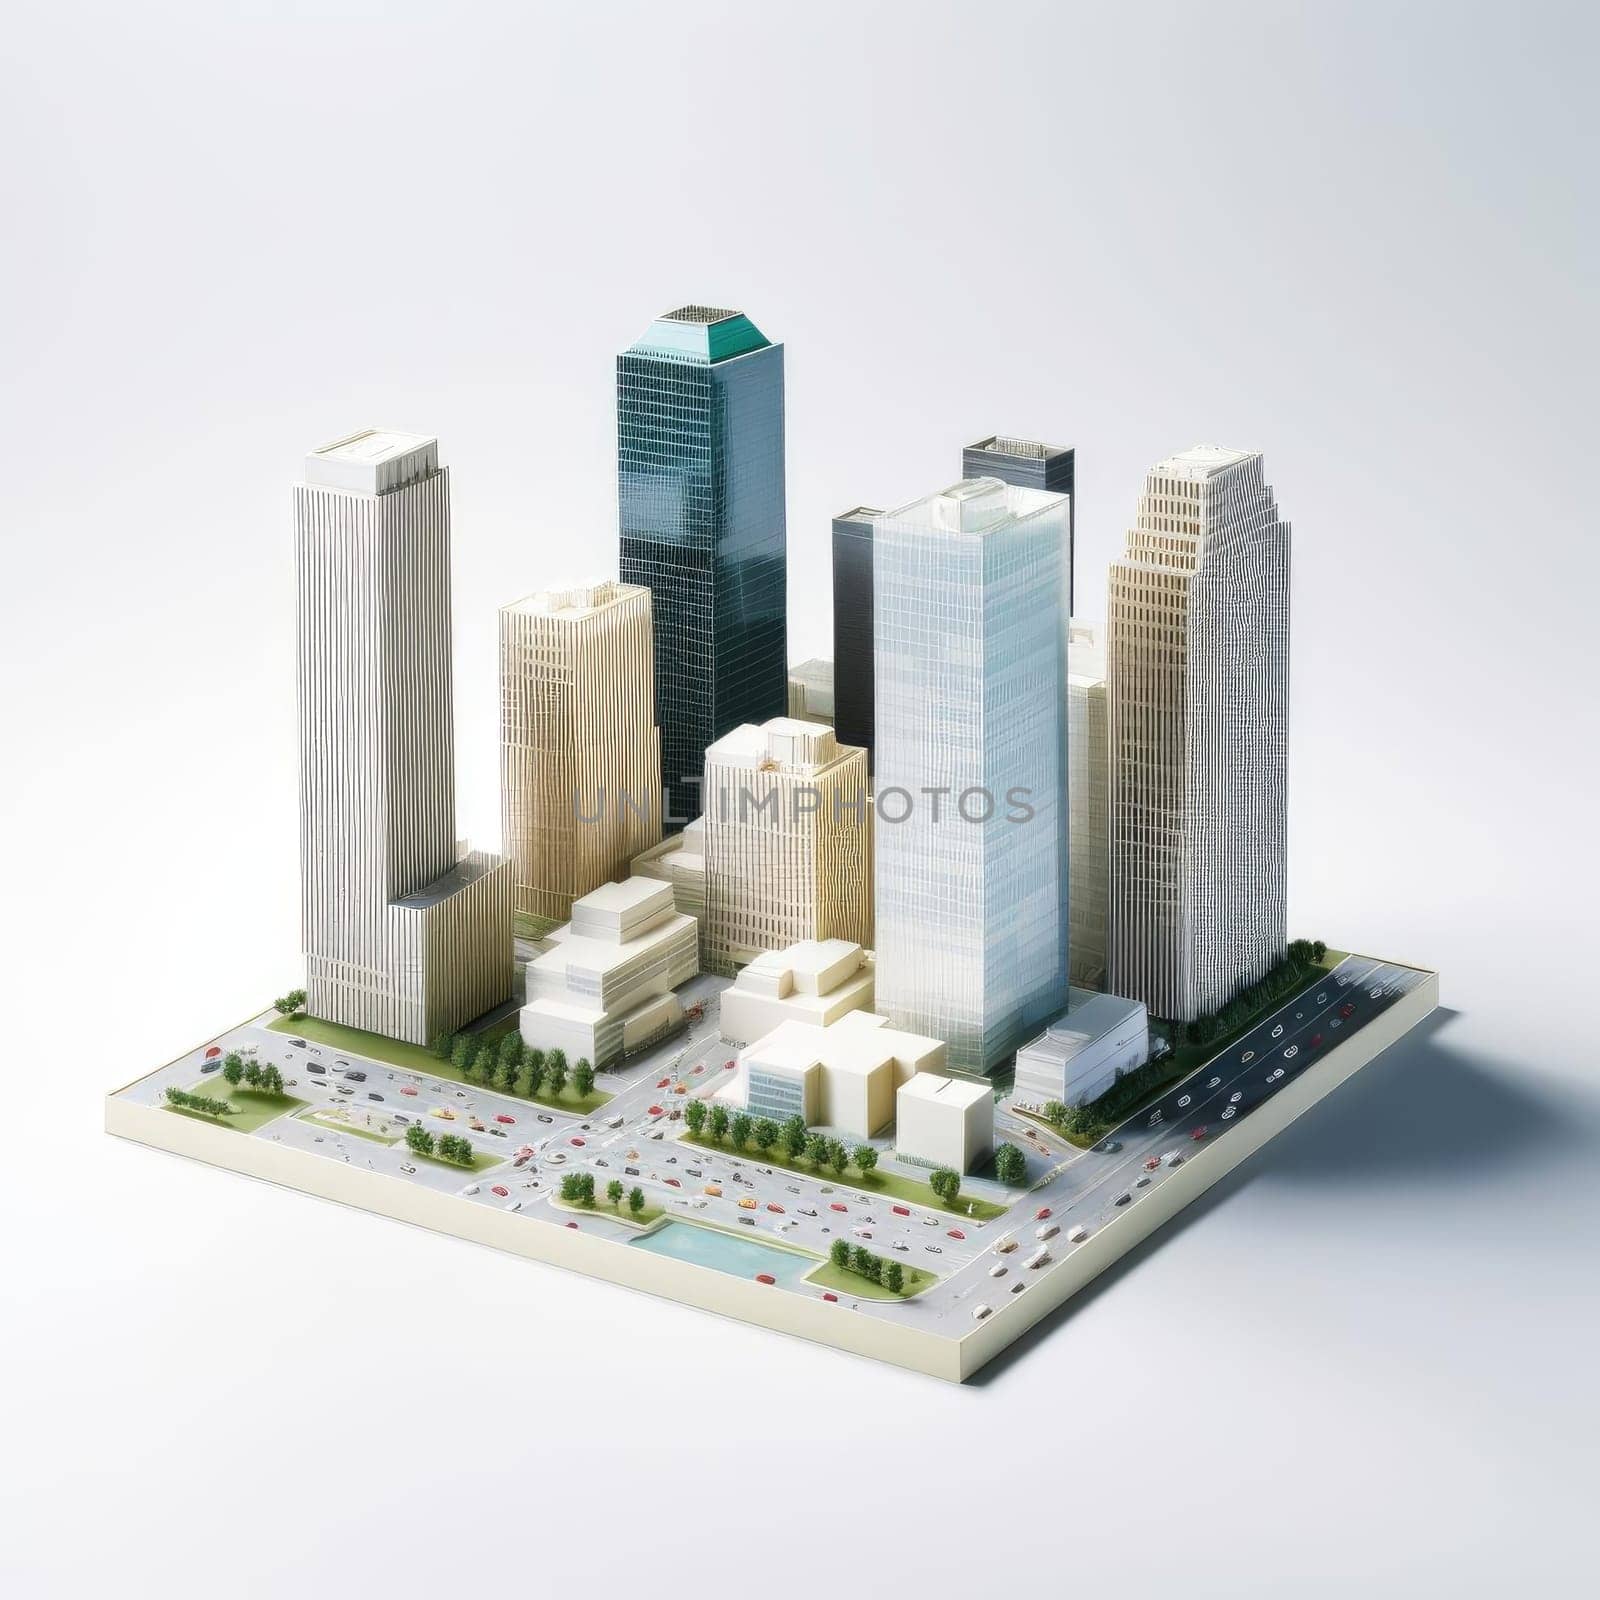 3D model of a modern city with skyscrapers and high-rise buildings by eduardobellotto